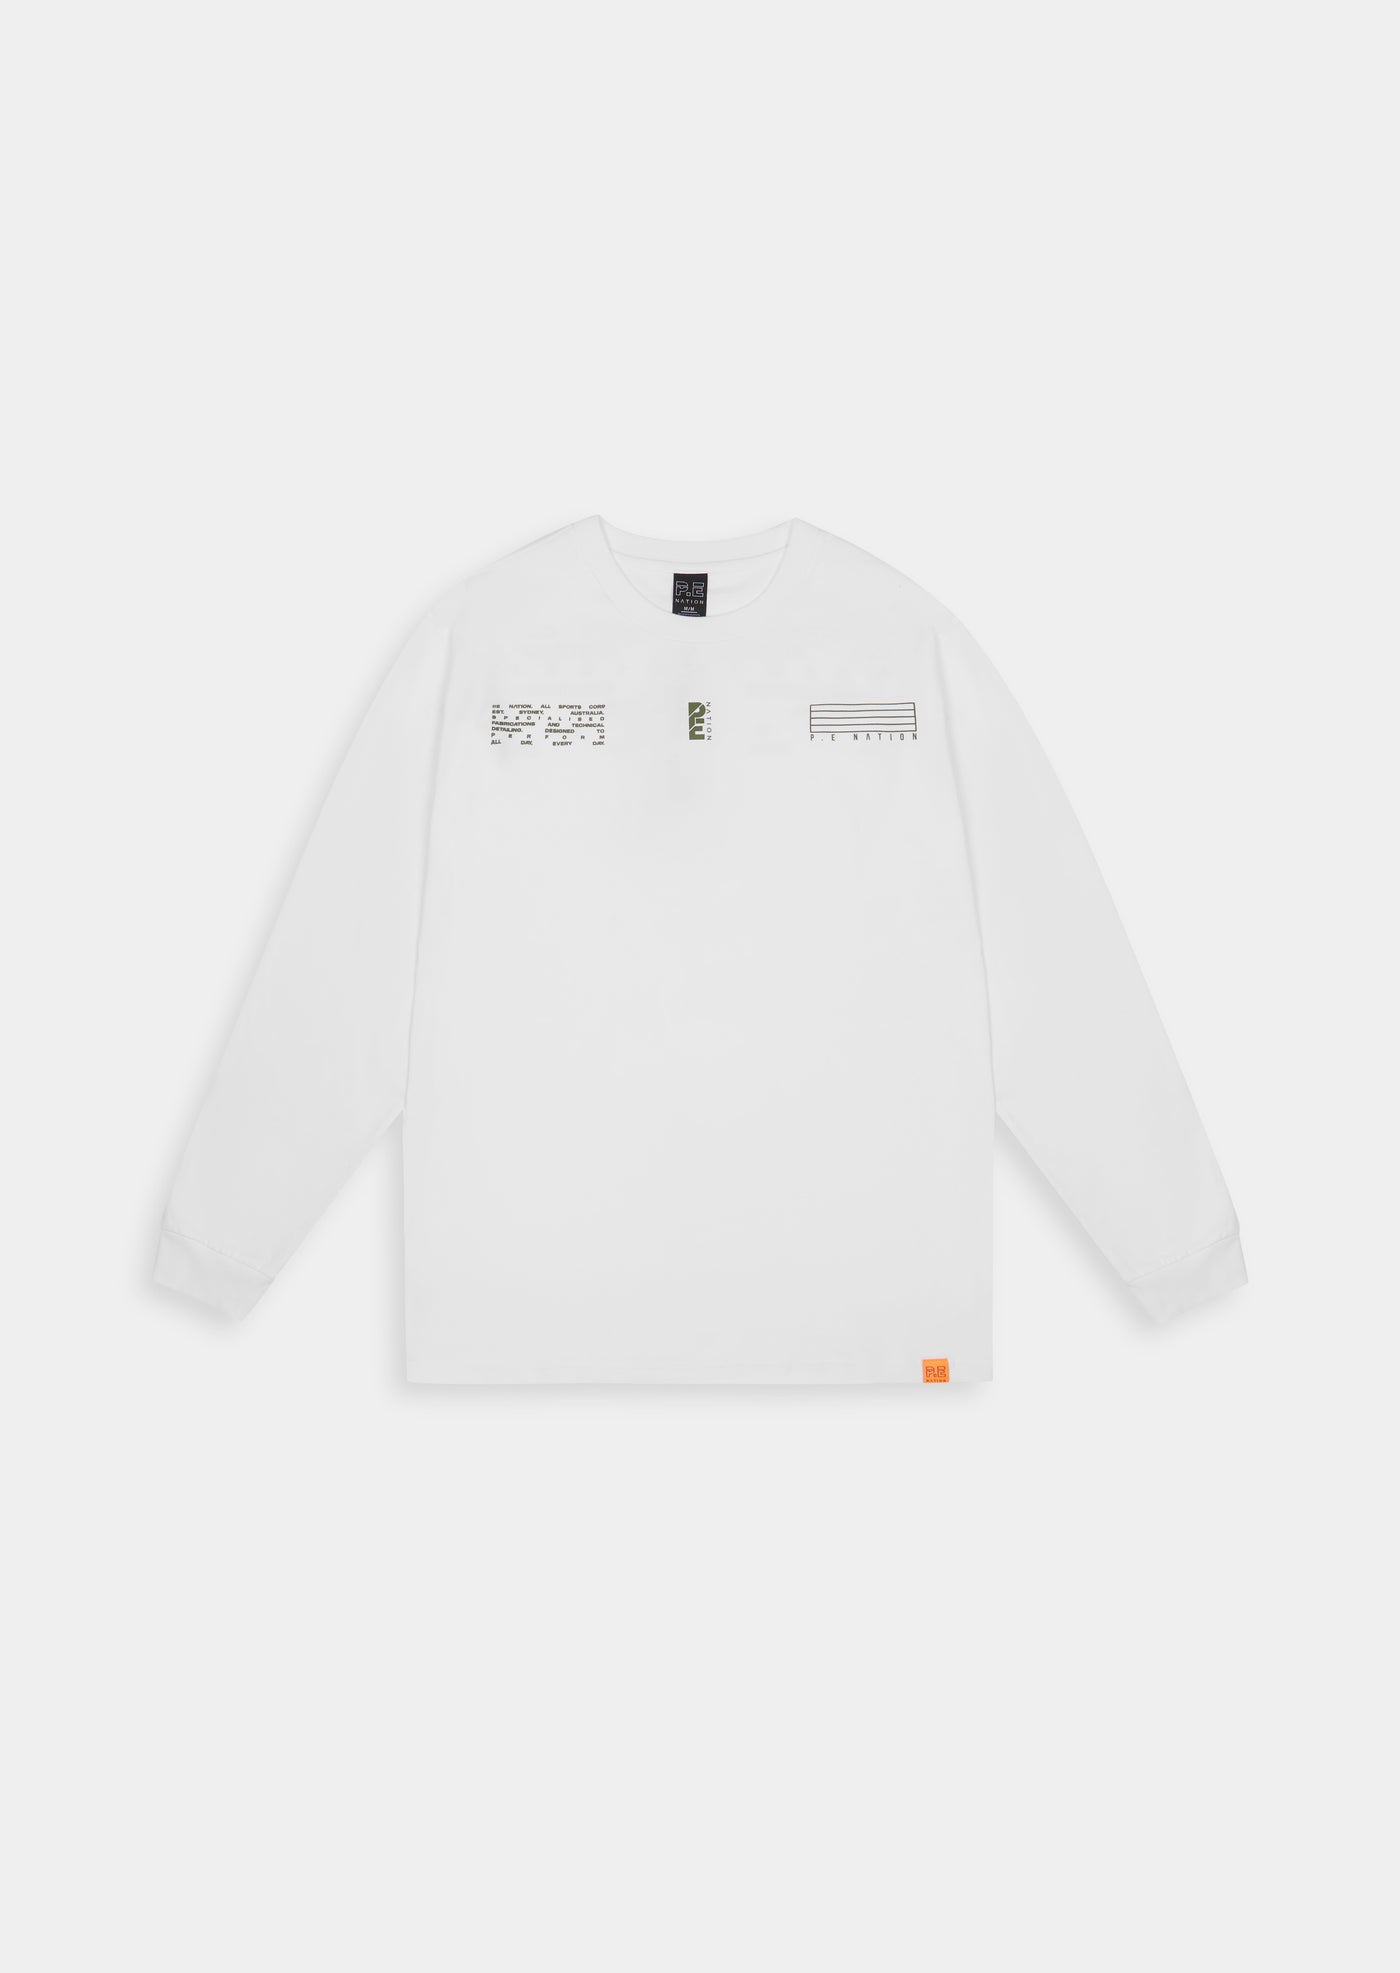 LEVEL LS TEE IN WHITE